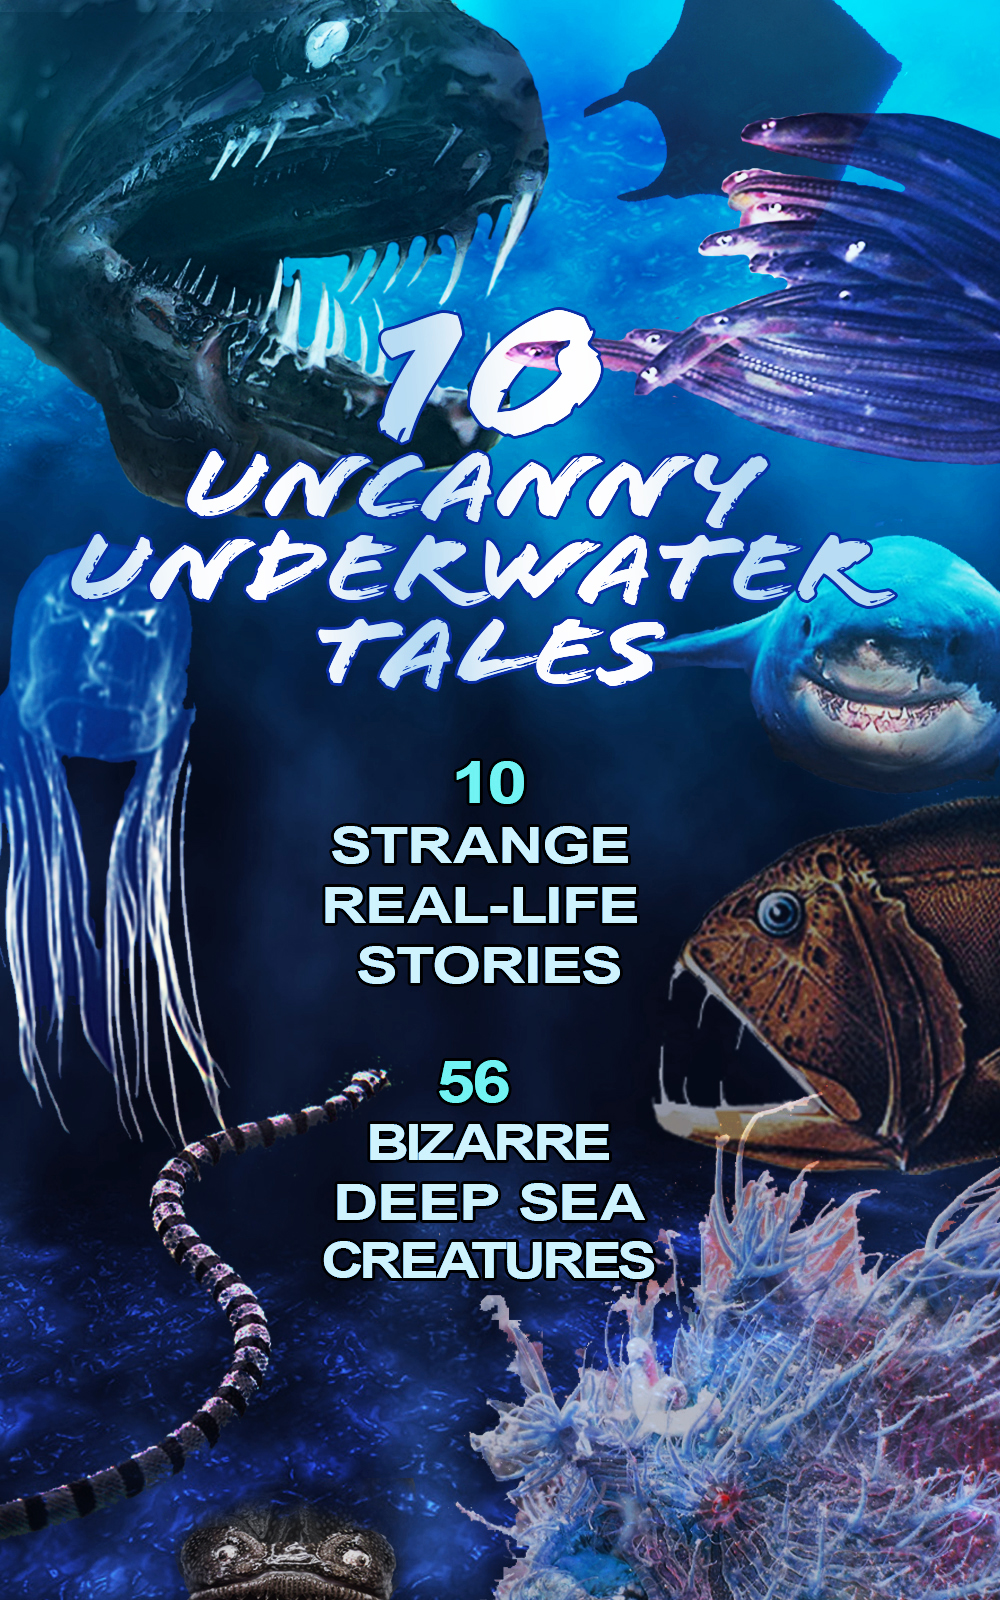 FREE: 10 Uncanny Underwater Tales: 10 Types of Real Life Ocean Creatures by Michael Volpi